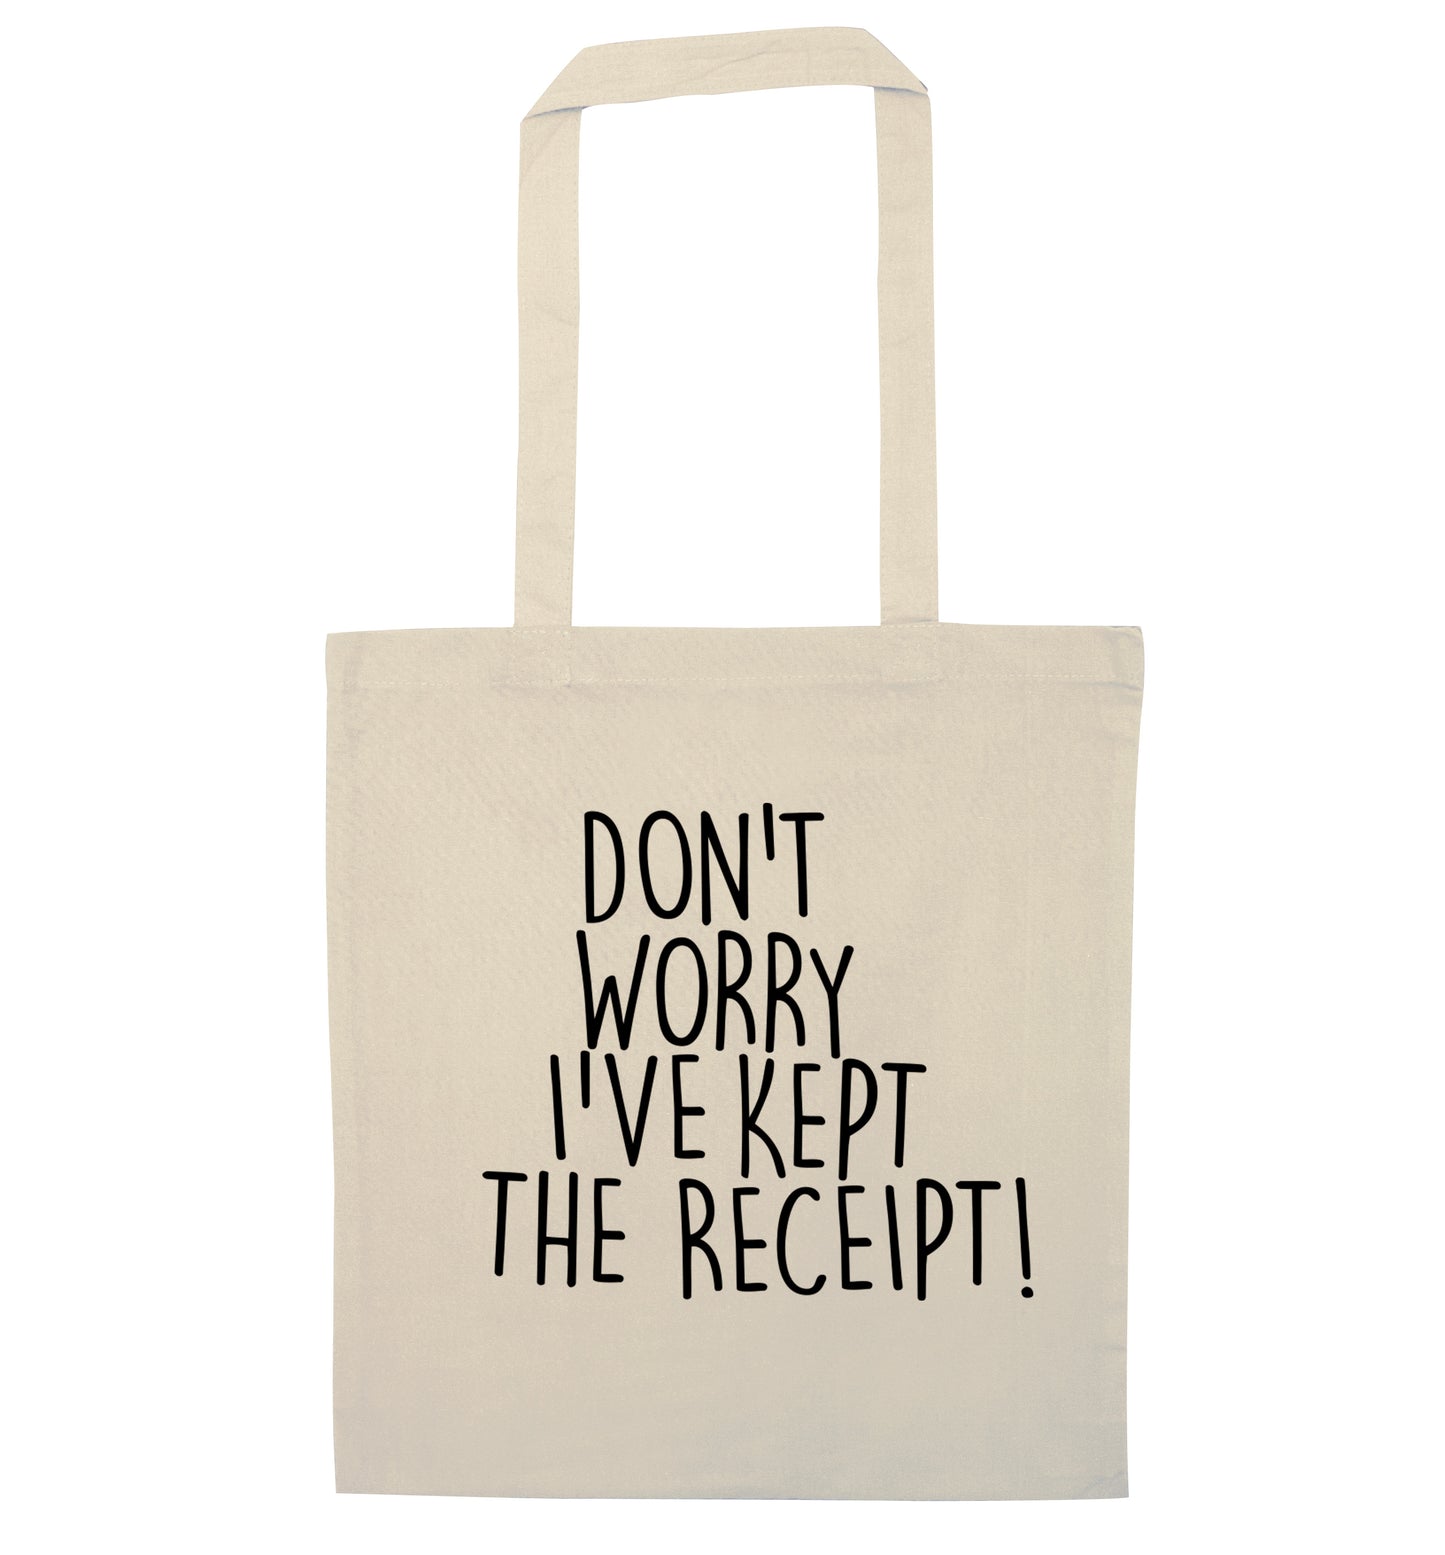 Don't Worry I've Kept the Receipt natural tote bag